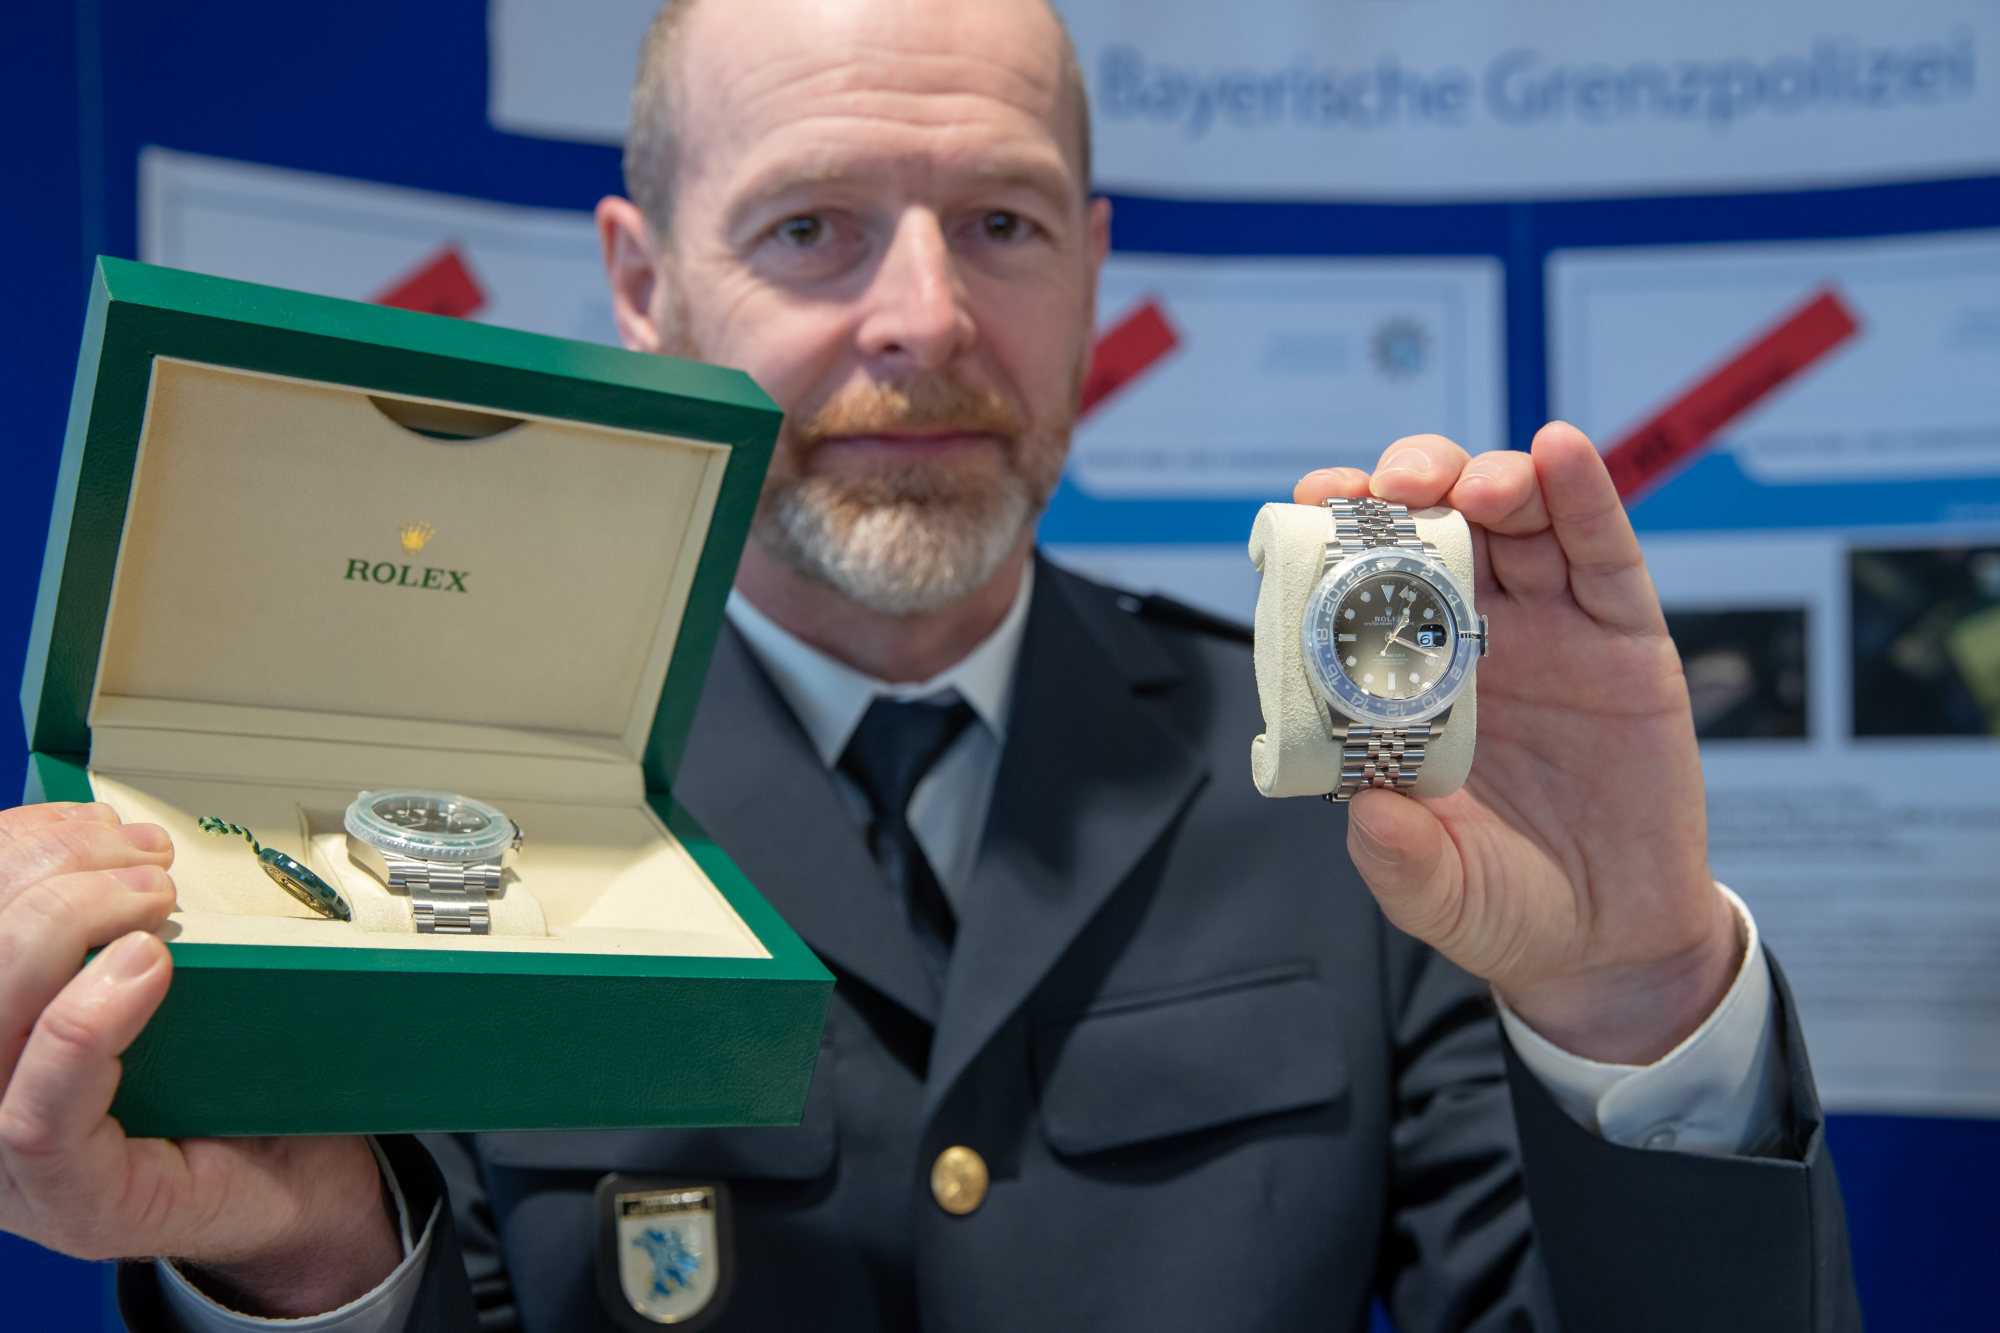  Rolex watches are highly prized by collectors, which makes them tempting targets for thieves. Photo: Getty Images